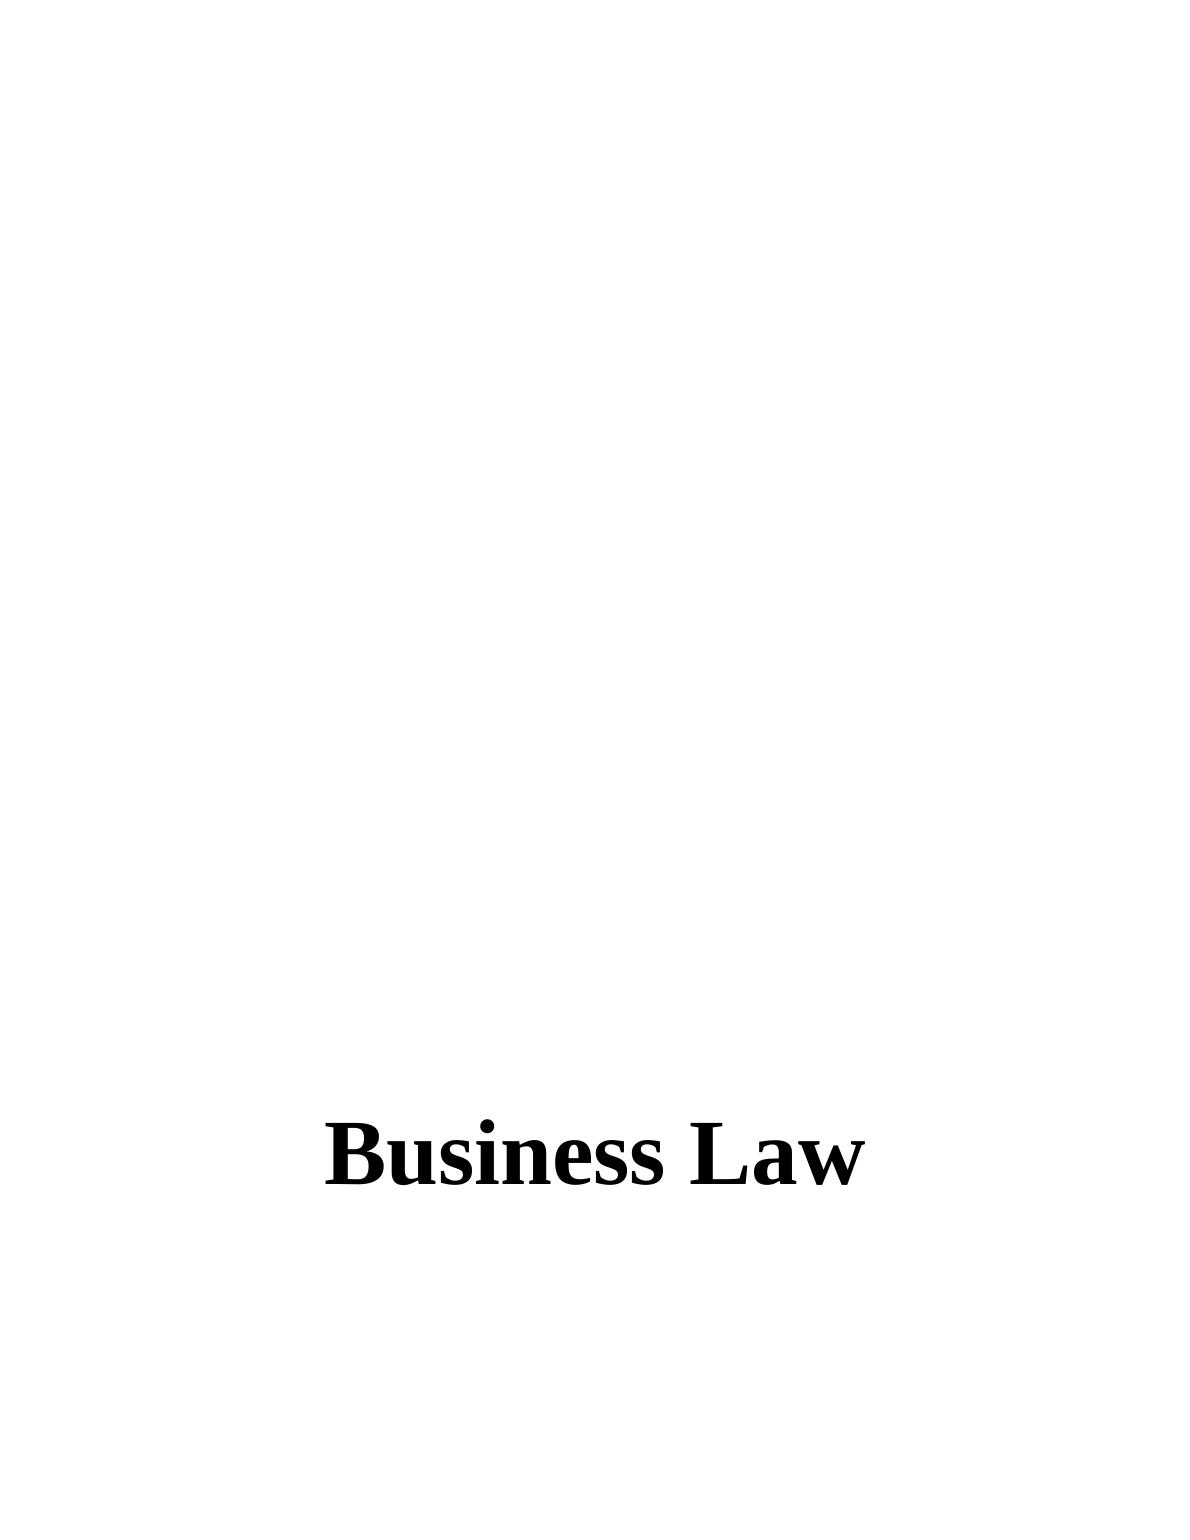 Business law_1